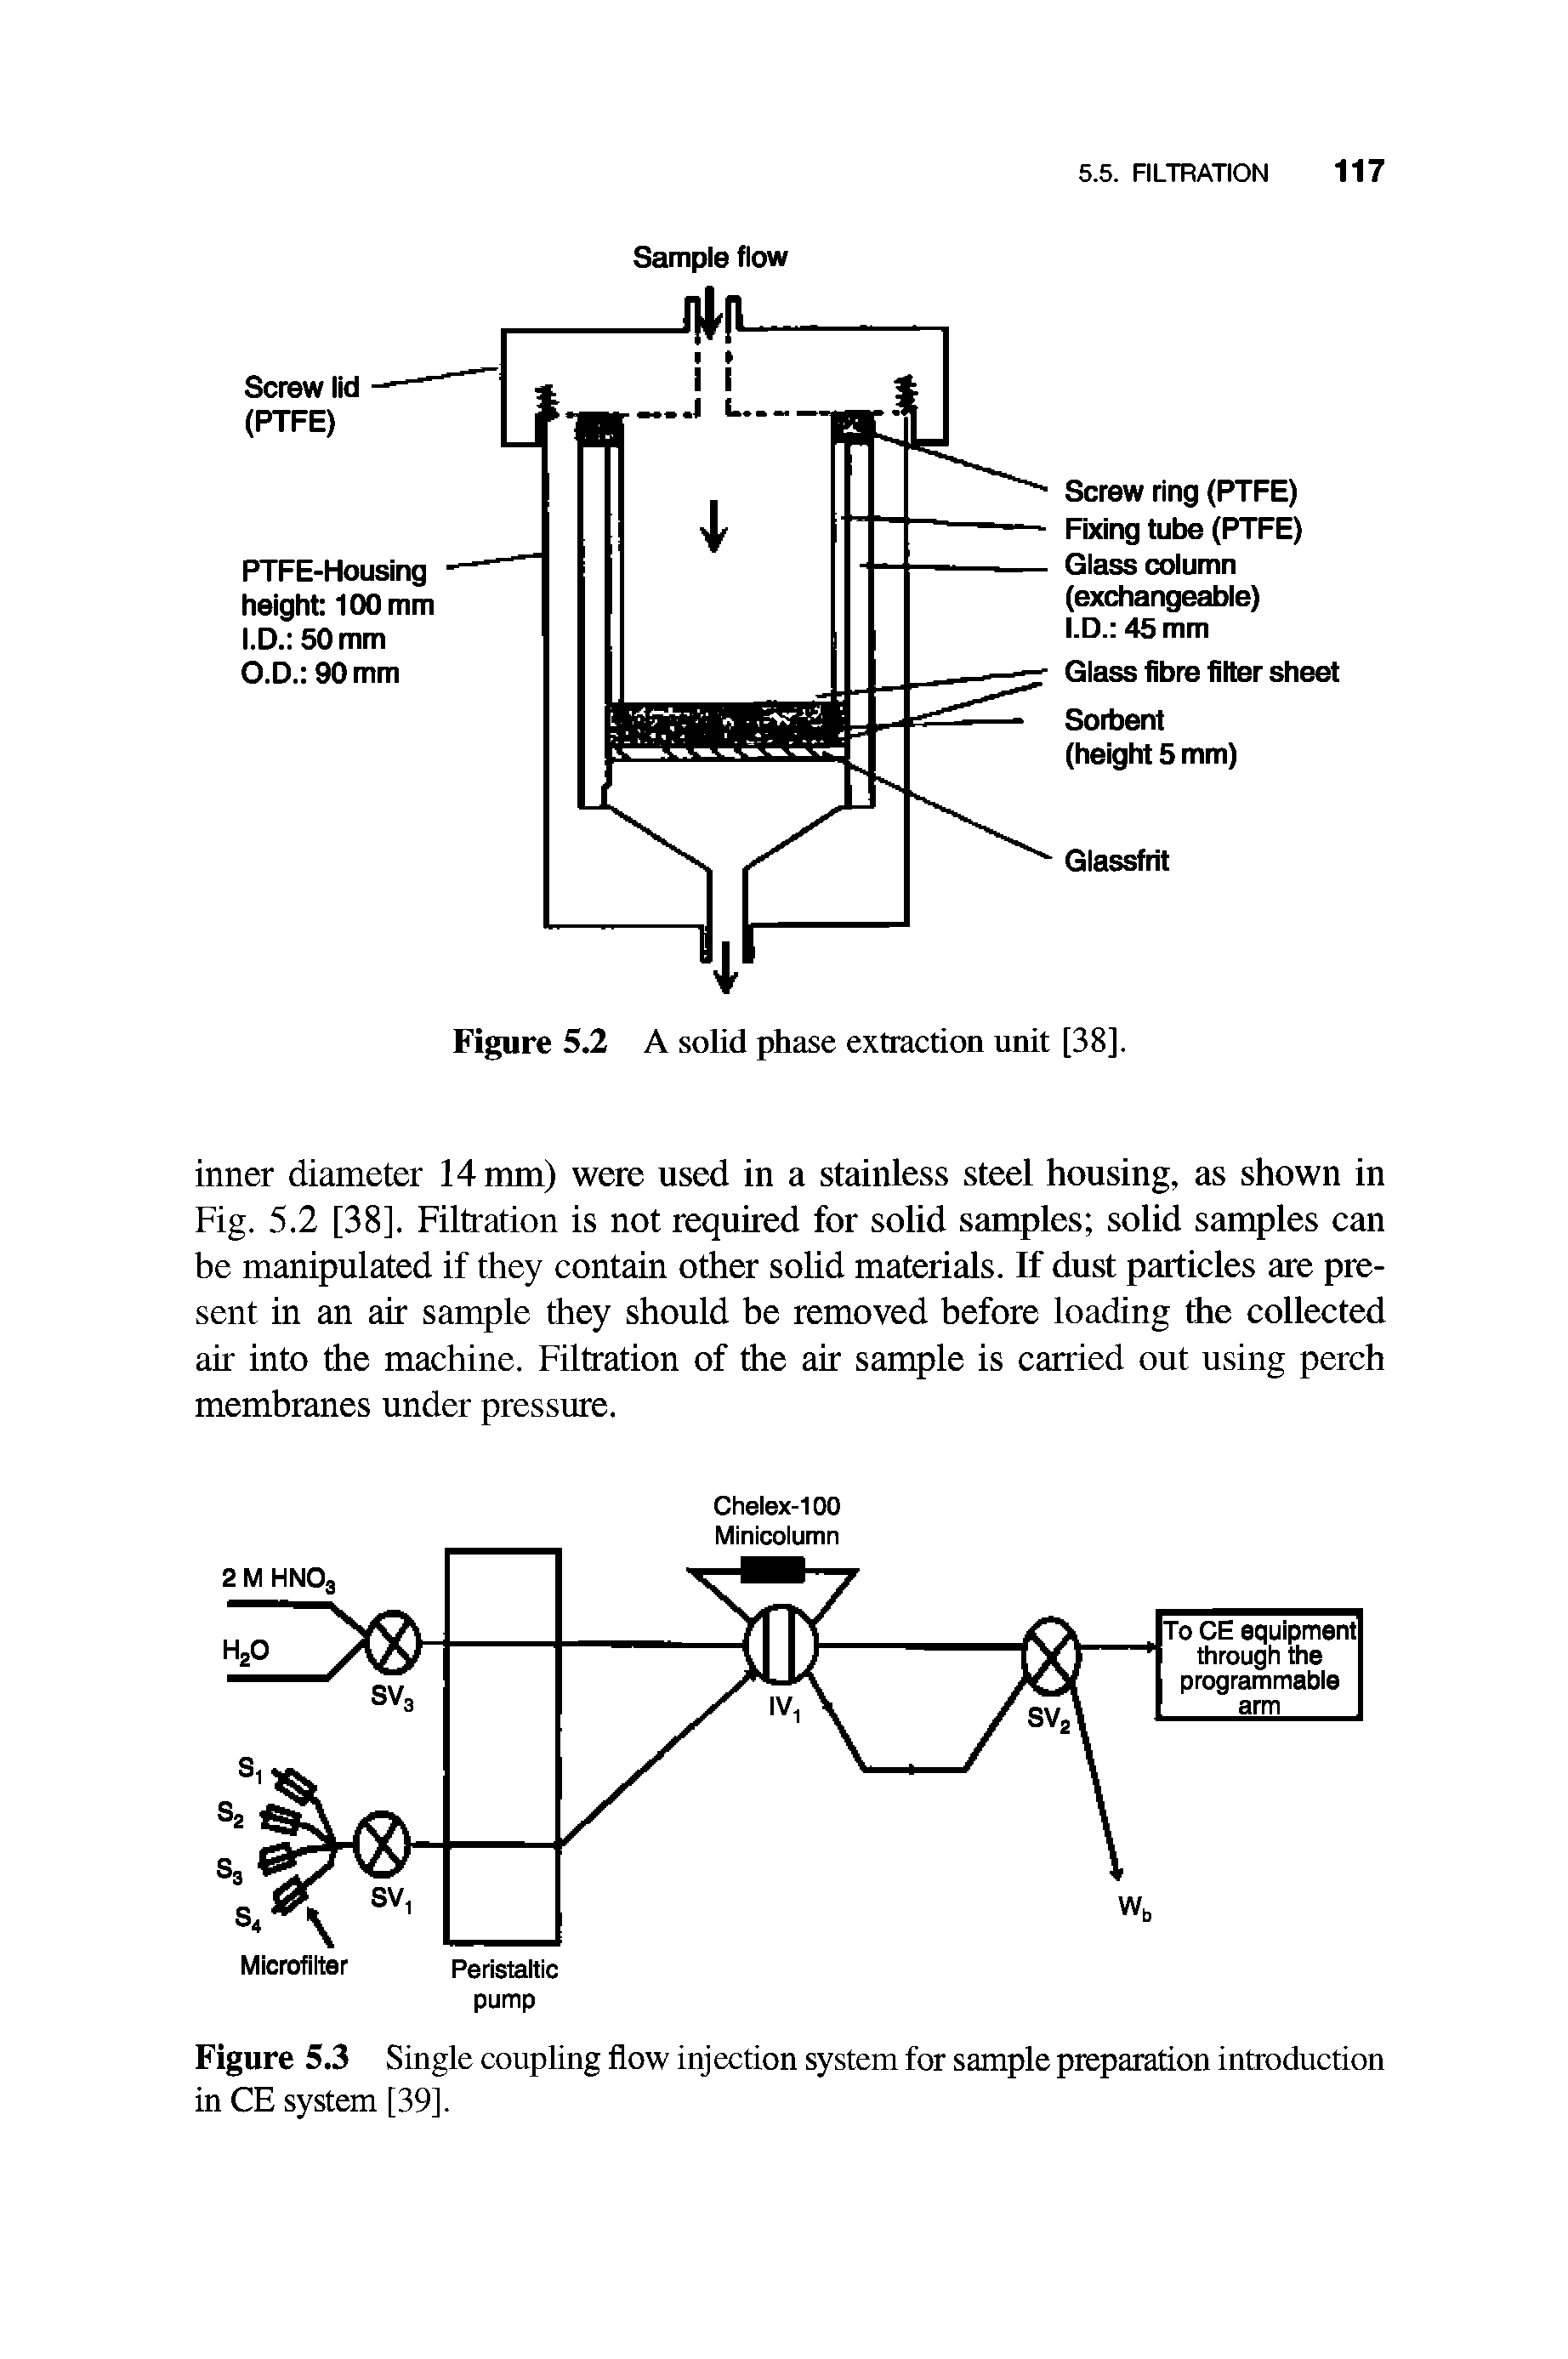 Figure 5.3 Single coupling flow injection system for sample preparation introduction in CE system [39].